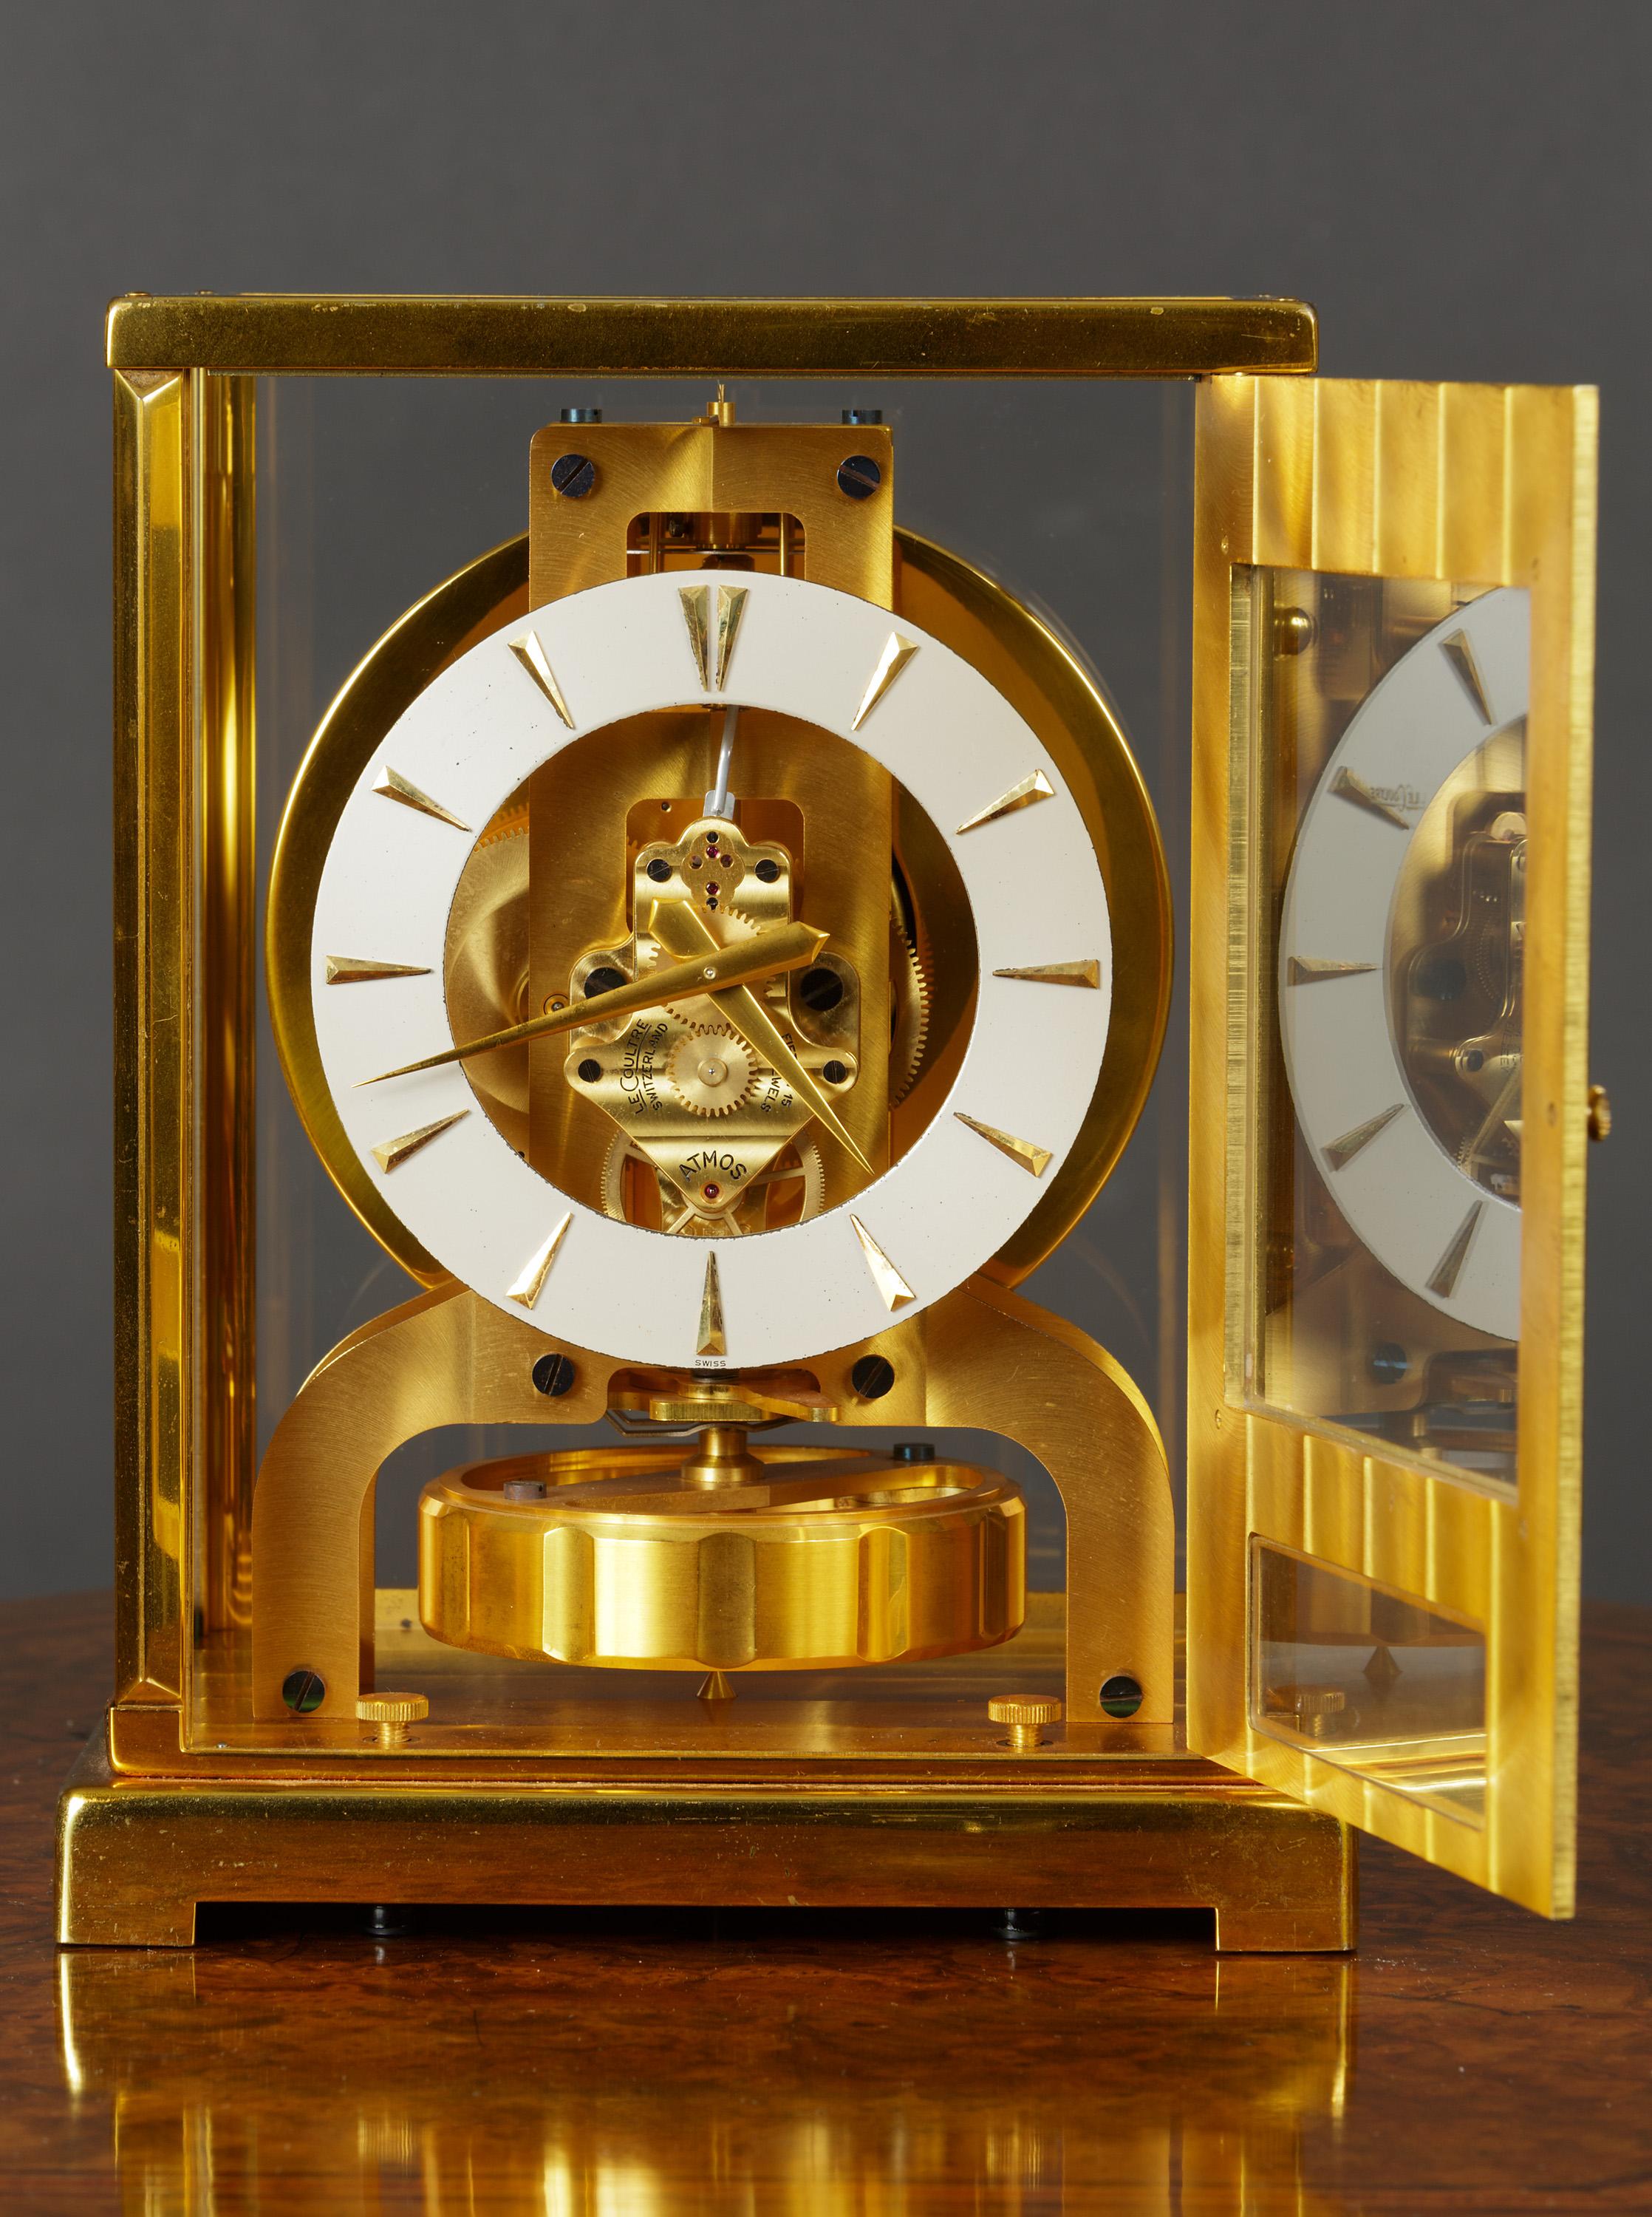 JAEGER LE COULTRE

Tuxedo Atmos clock with Ruby jewelled movement signed ‘Jaeger Le Coultre’.

Silvered dial with baton numerals and original gold plated hands. Oscillating indented disc pendulum. Opening glazed front door.

Outstanding